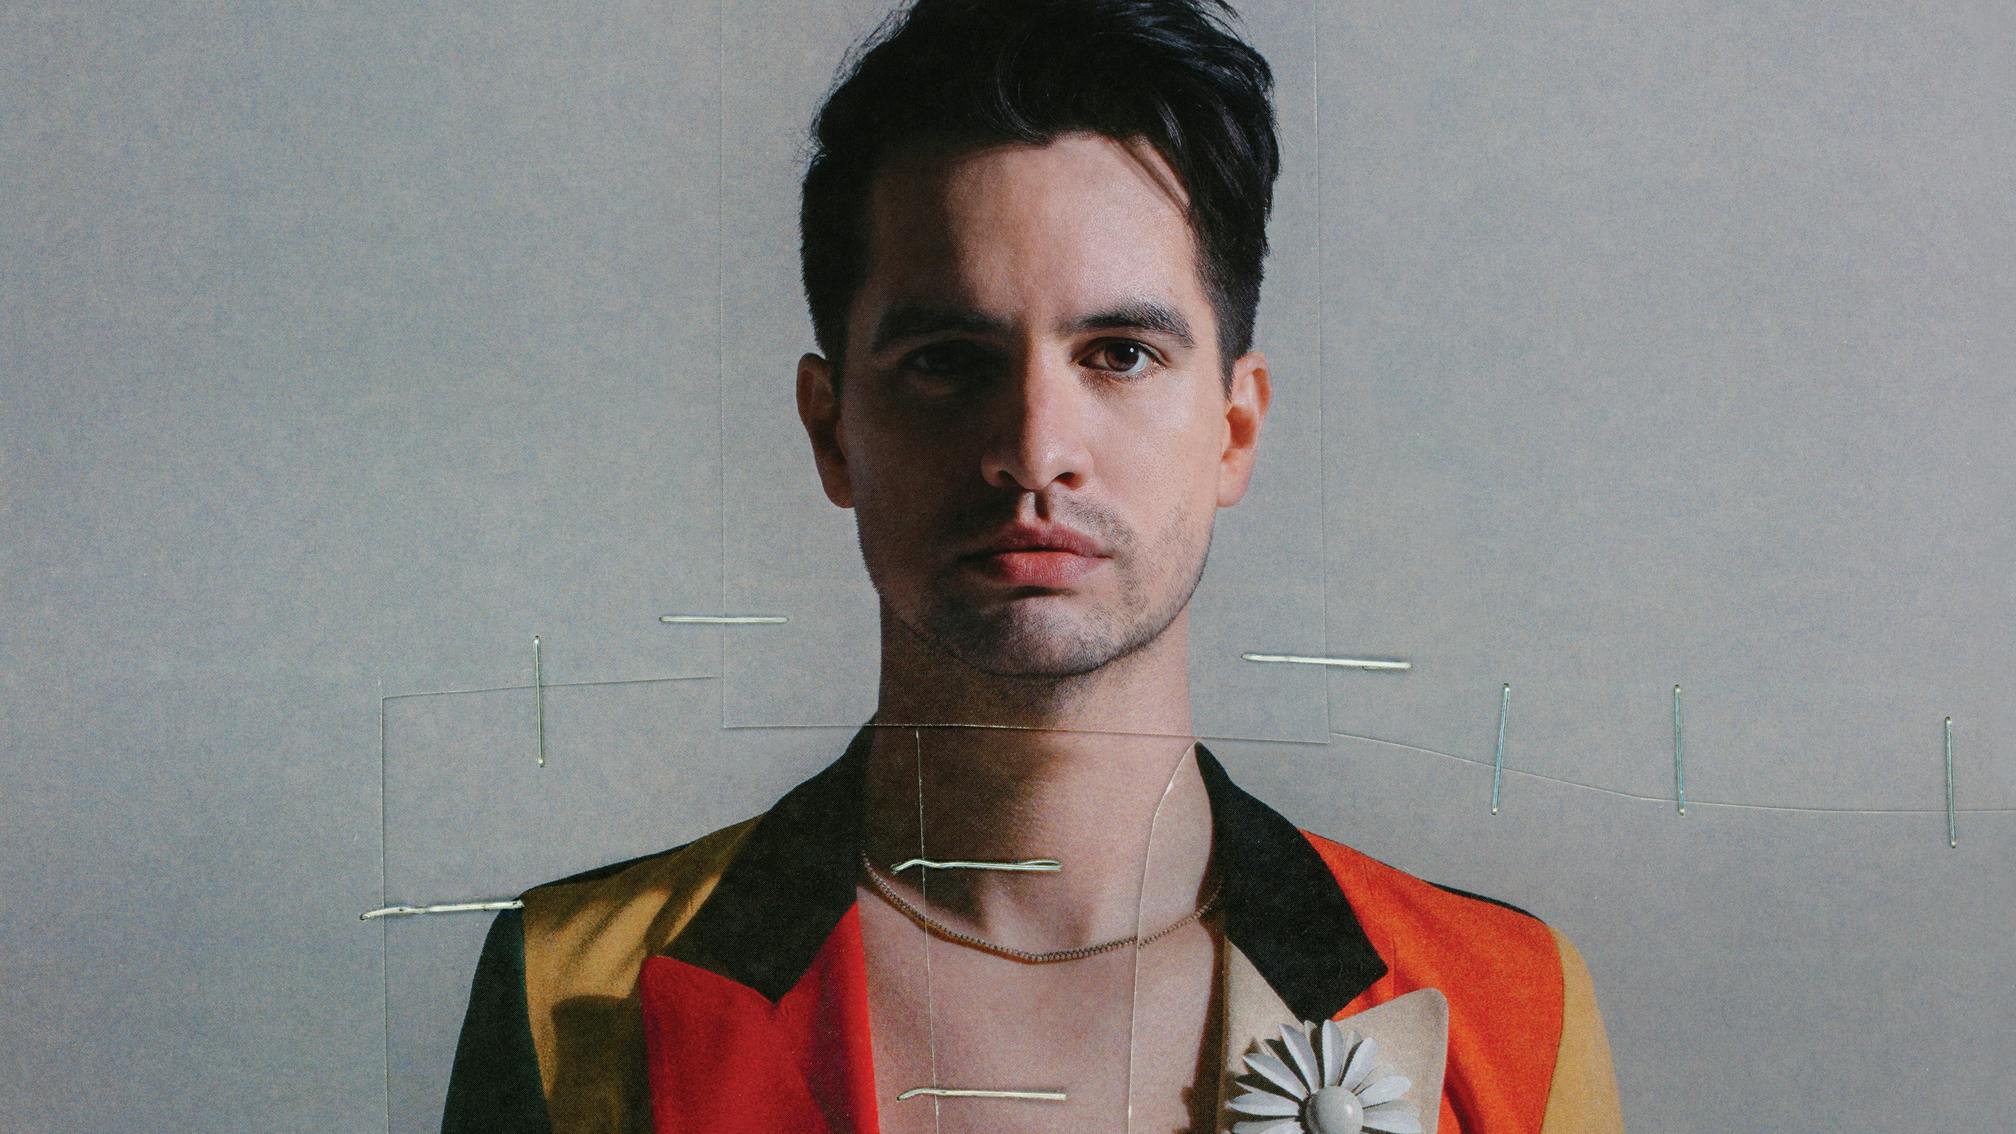 Panic! At The Disco play final show: “I’m overcome with gratitude”